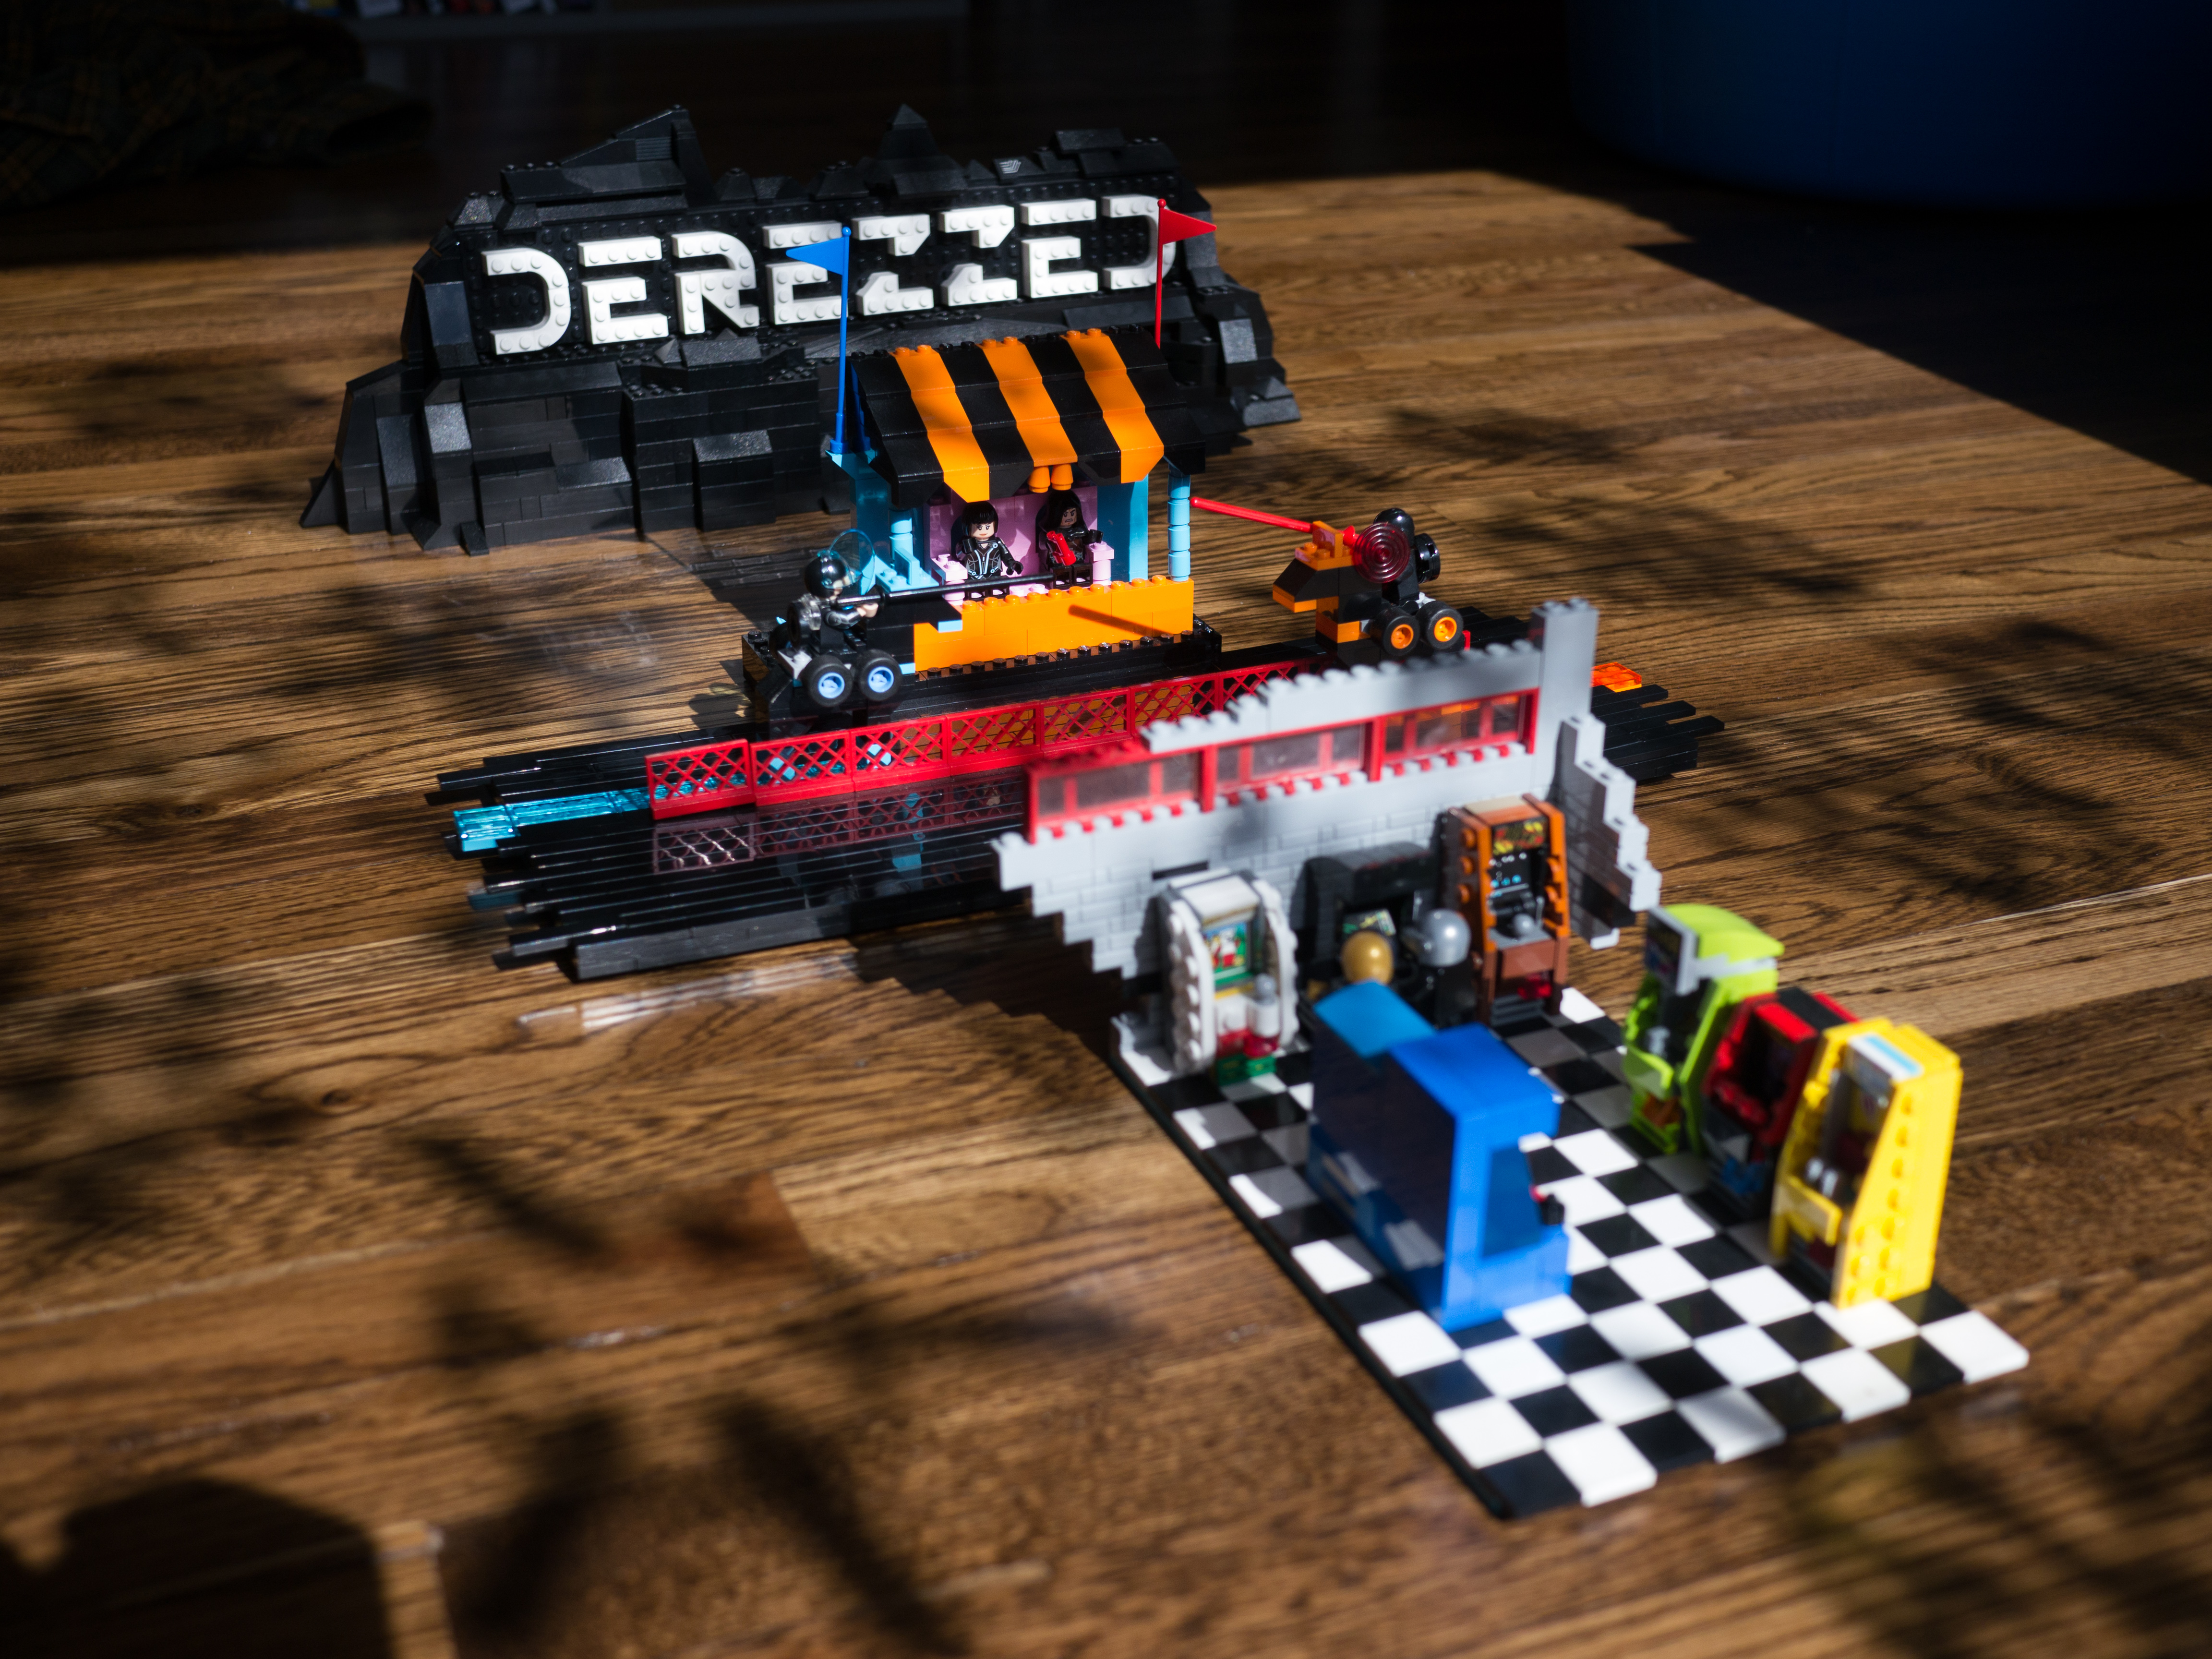 3/4 view of LEGO MOC of Derezzed